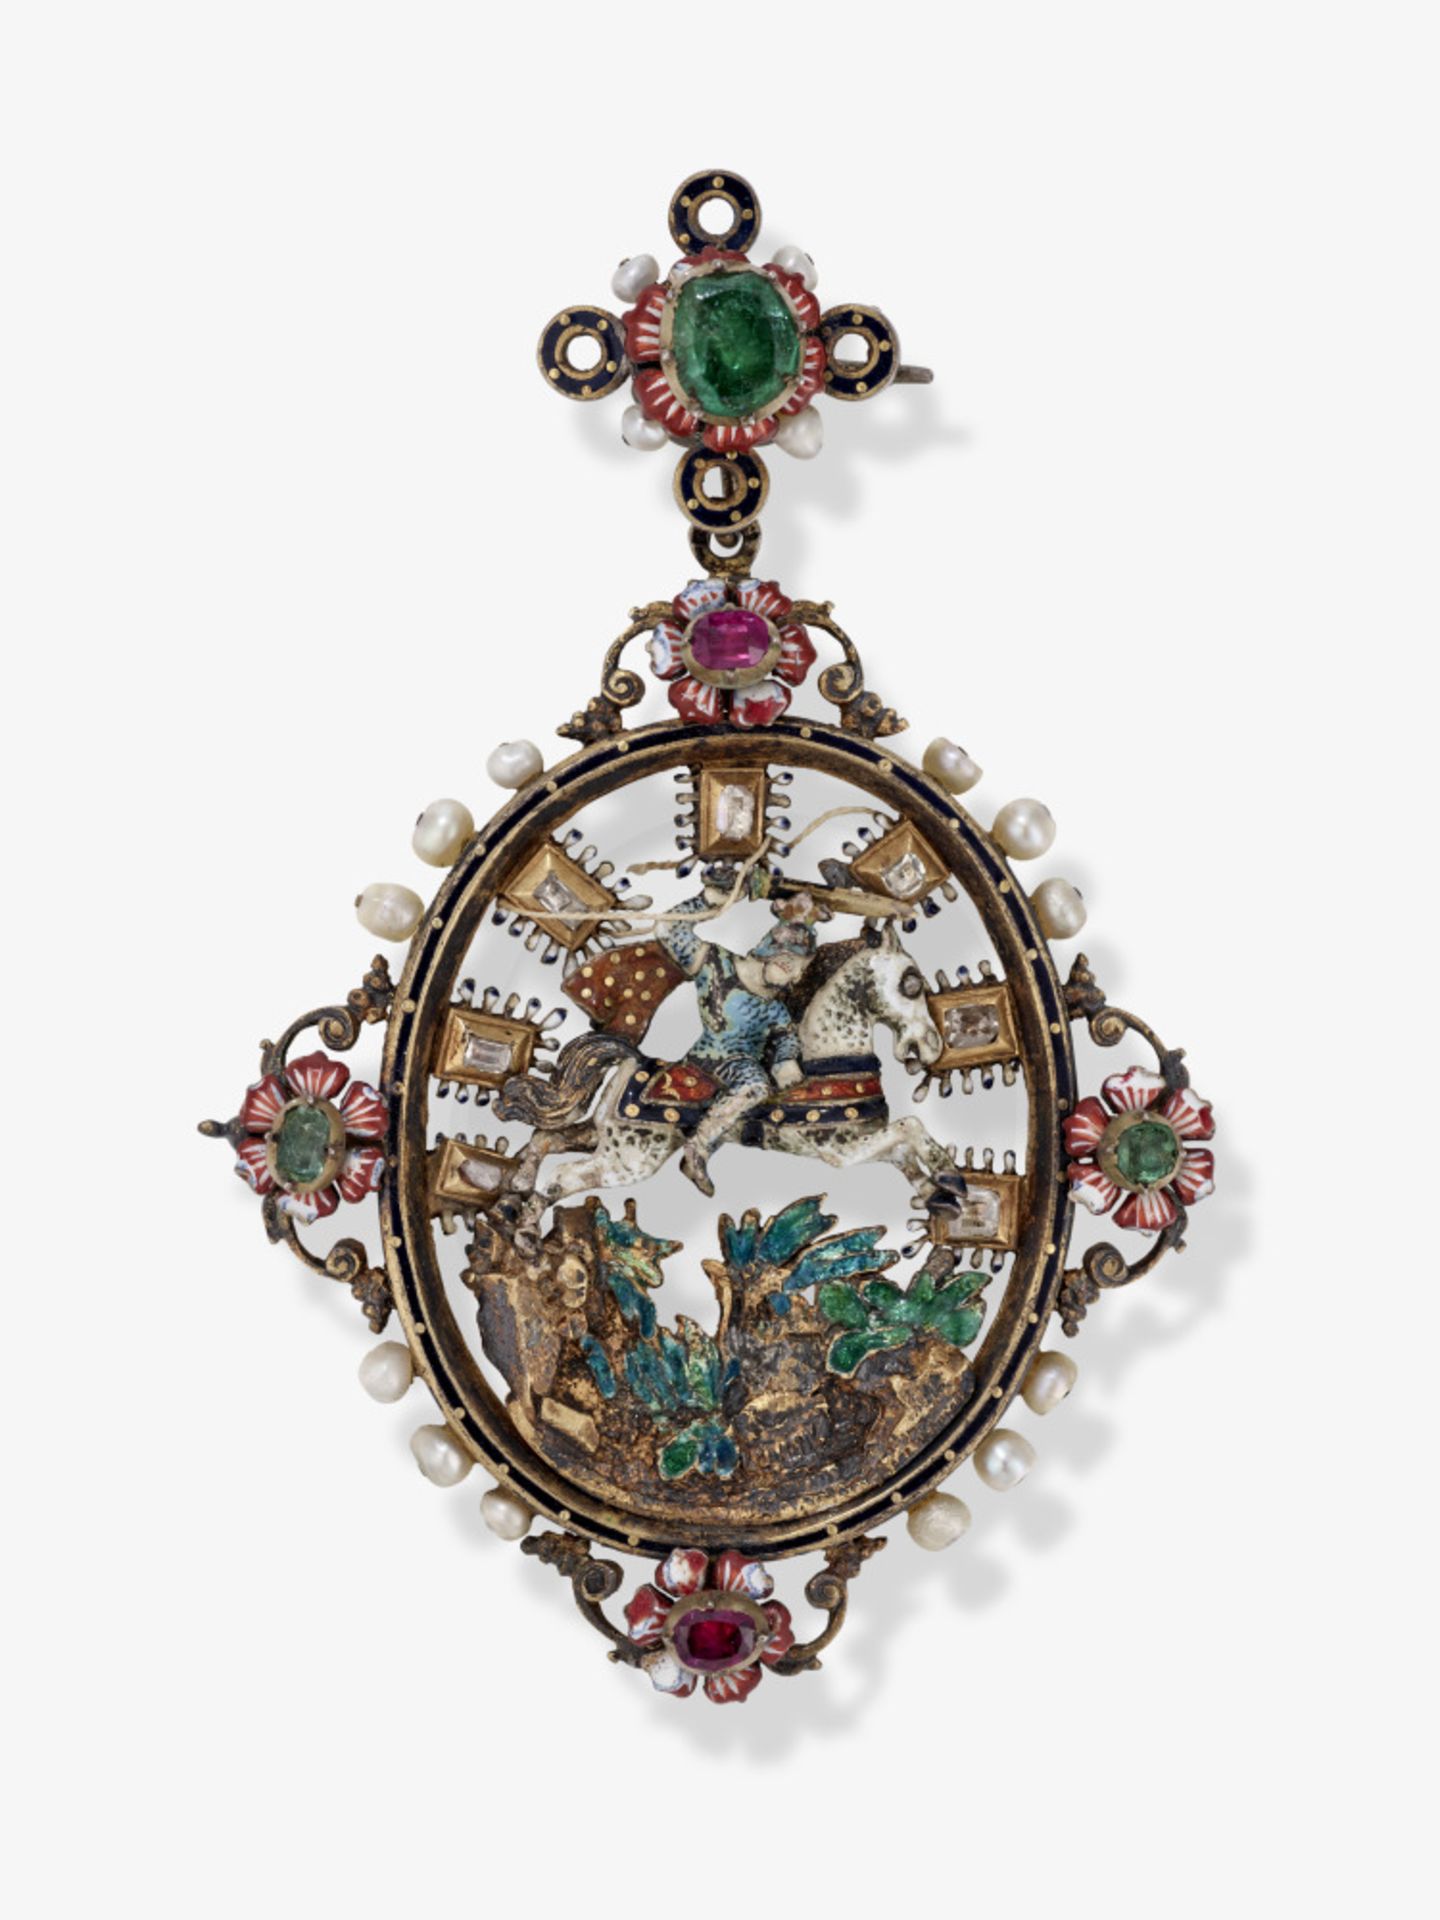 A pendant/brooch with a sculptural representation of Saint George - Germany, circa 1870